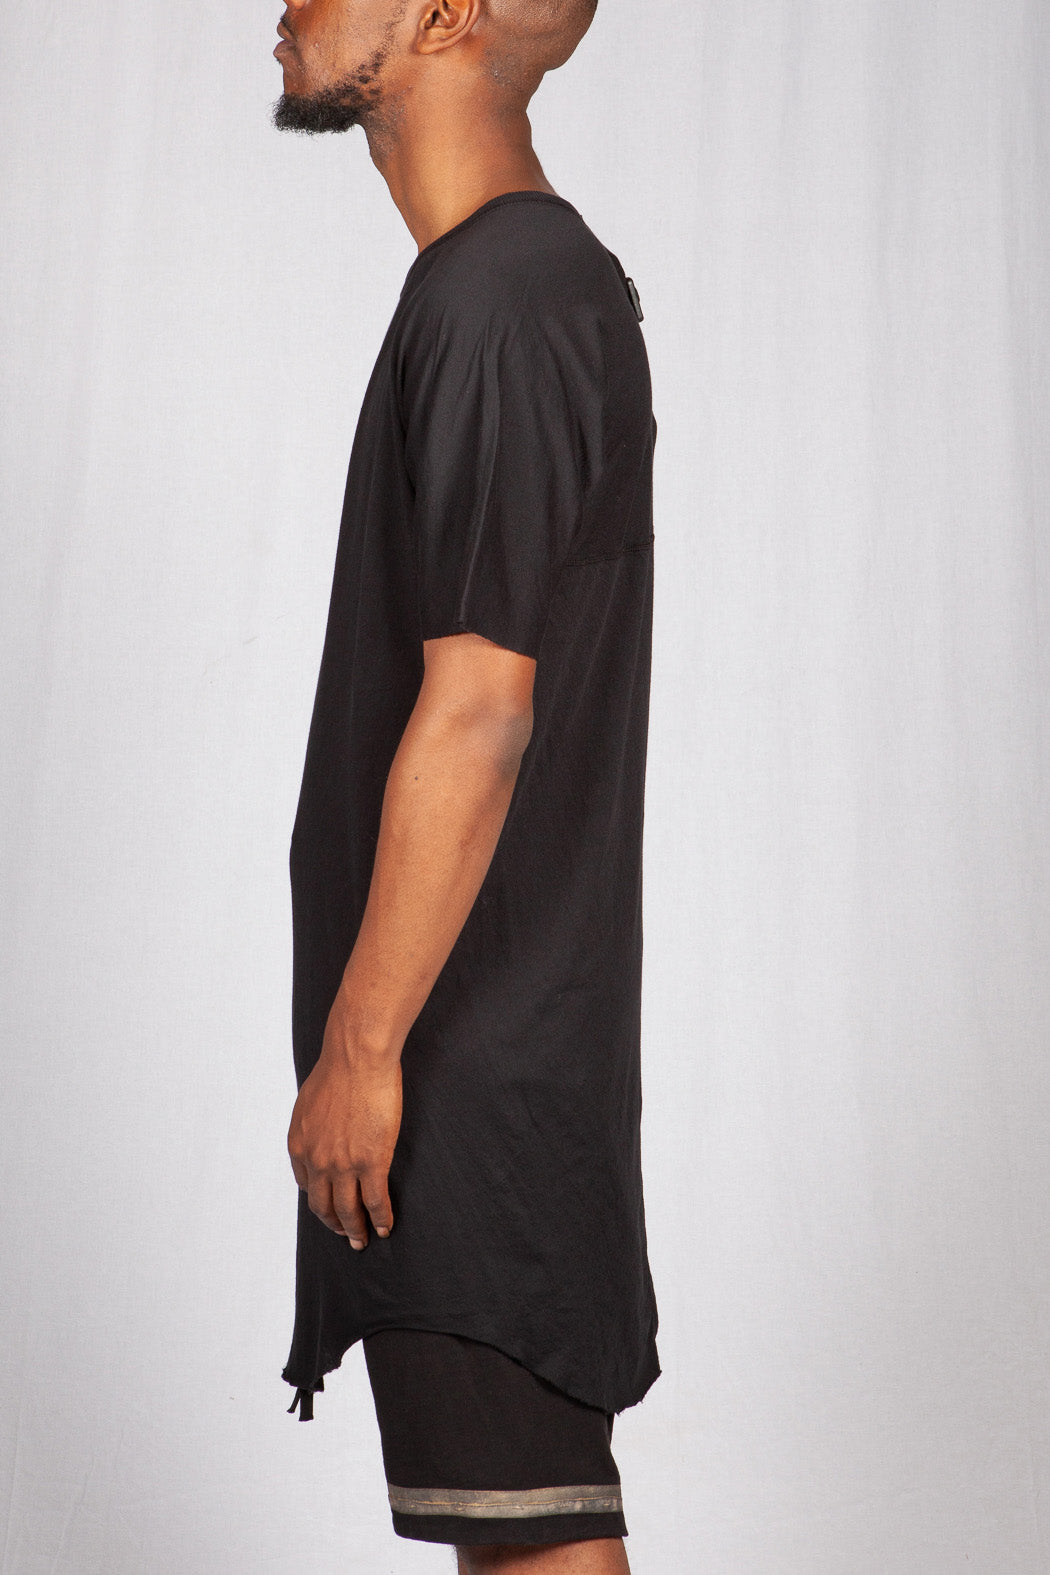 Black Object Dyed Long One Piece Regular Fit T-Shirt